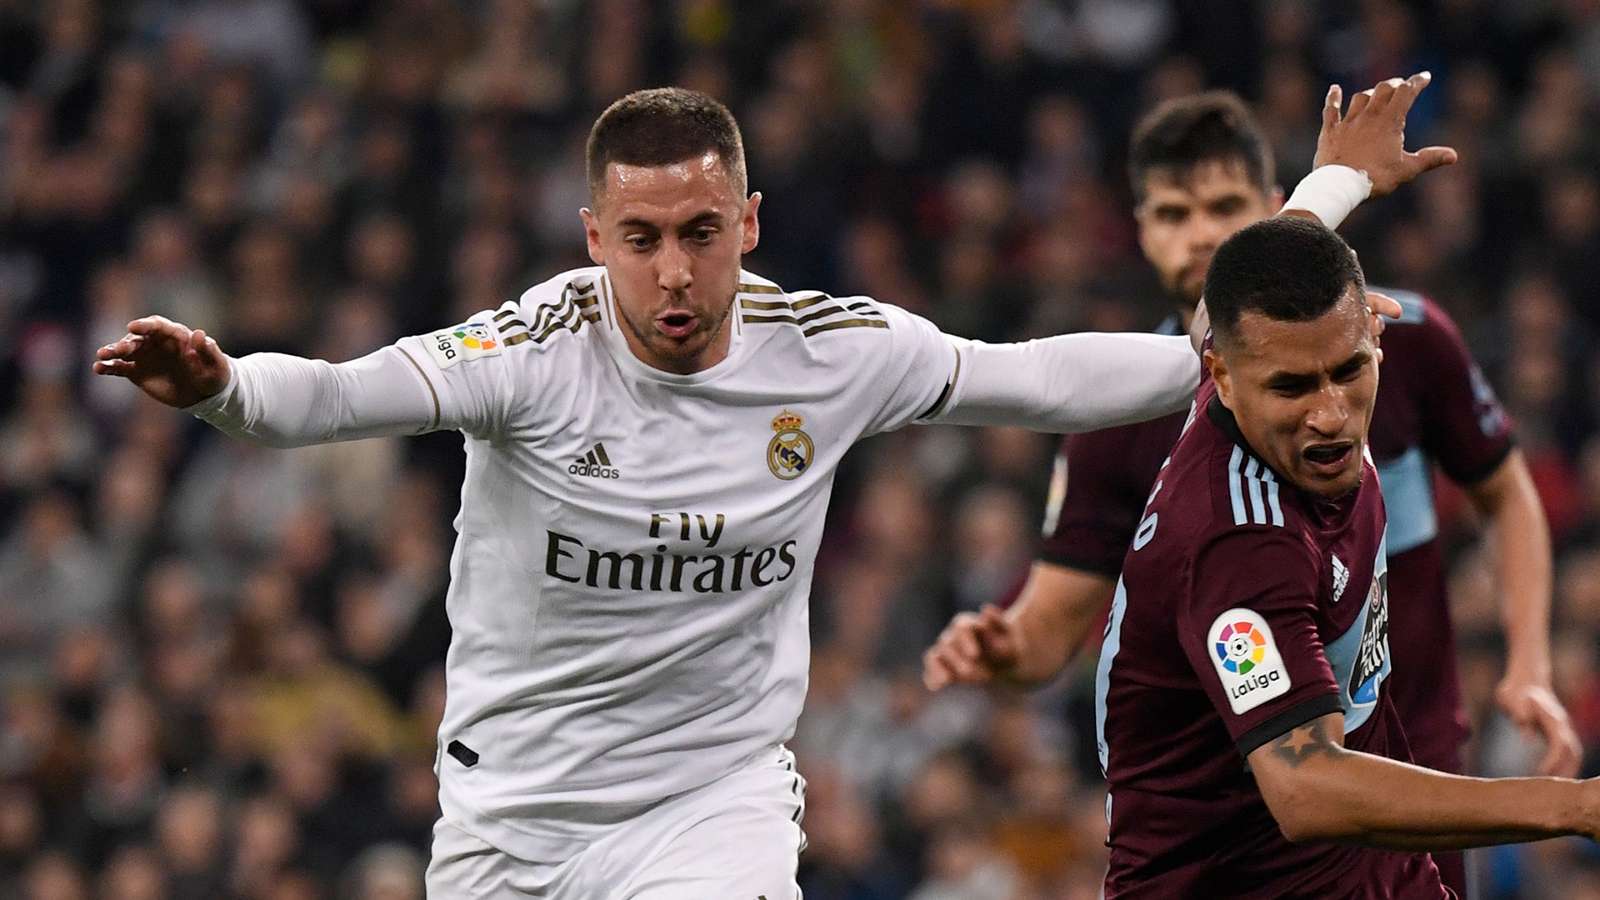 'Hazard is worth a lot to us' - Zidane happy to have winger back in Real Madrid lineup - Bóng Đá